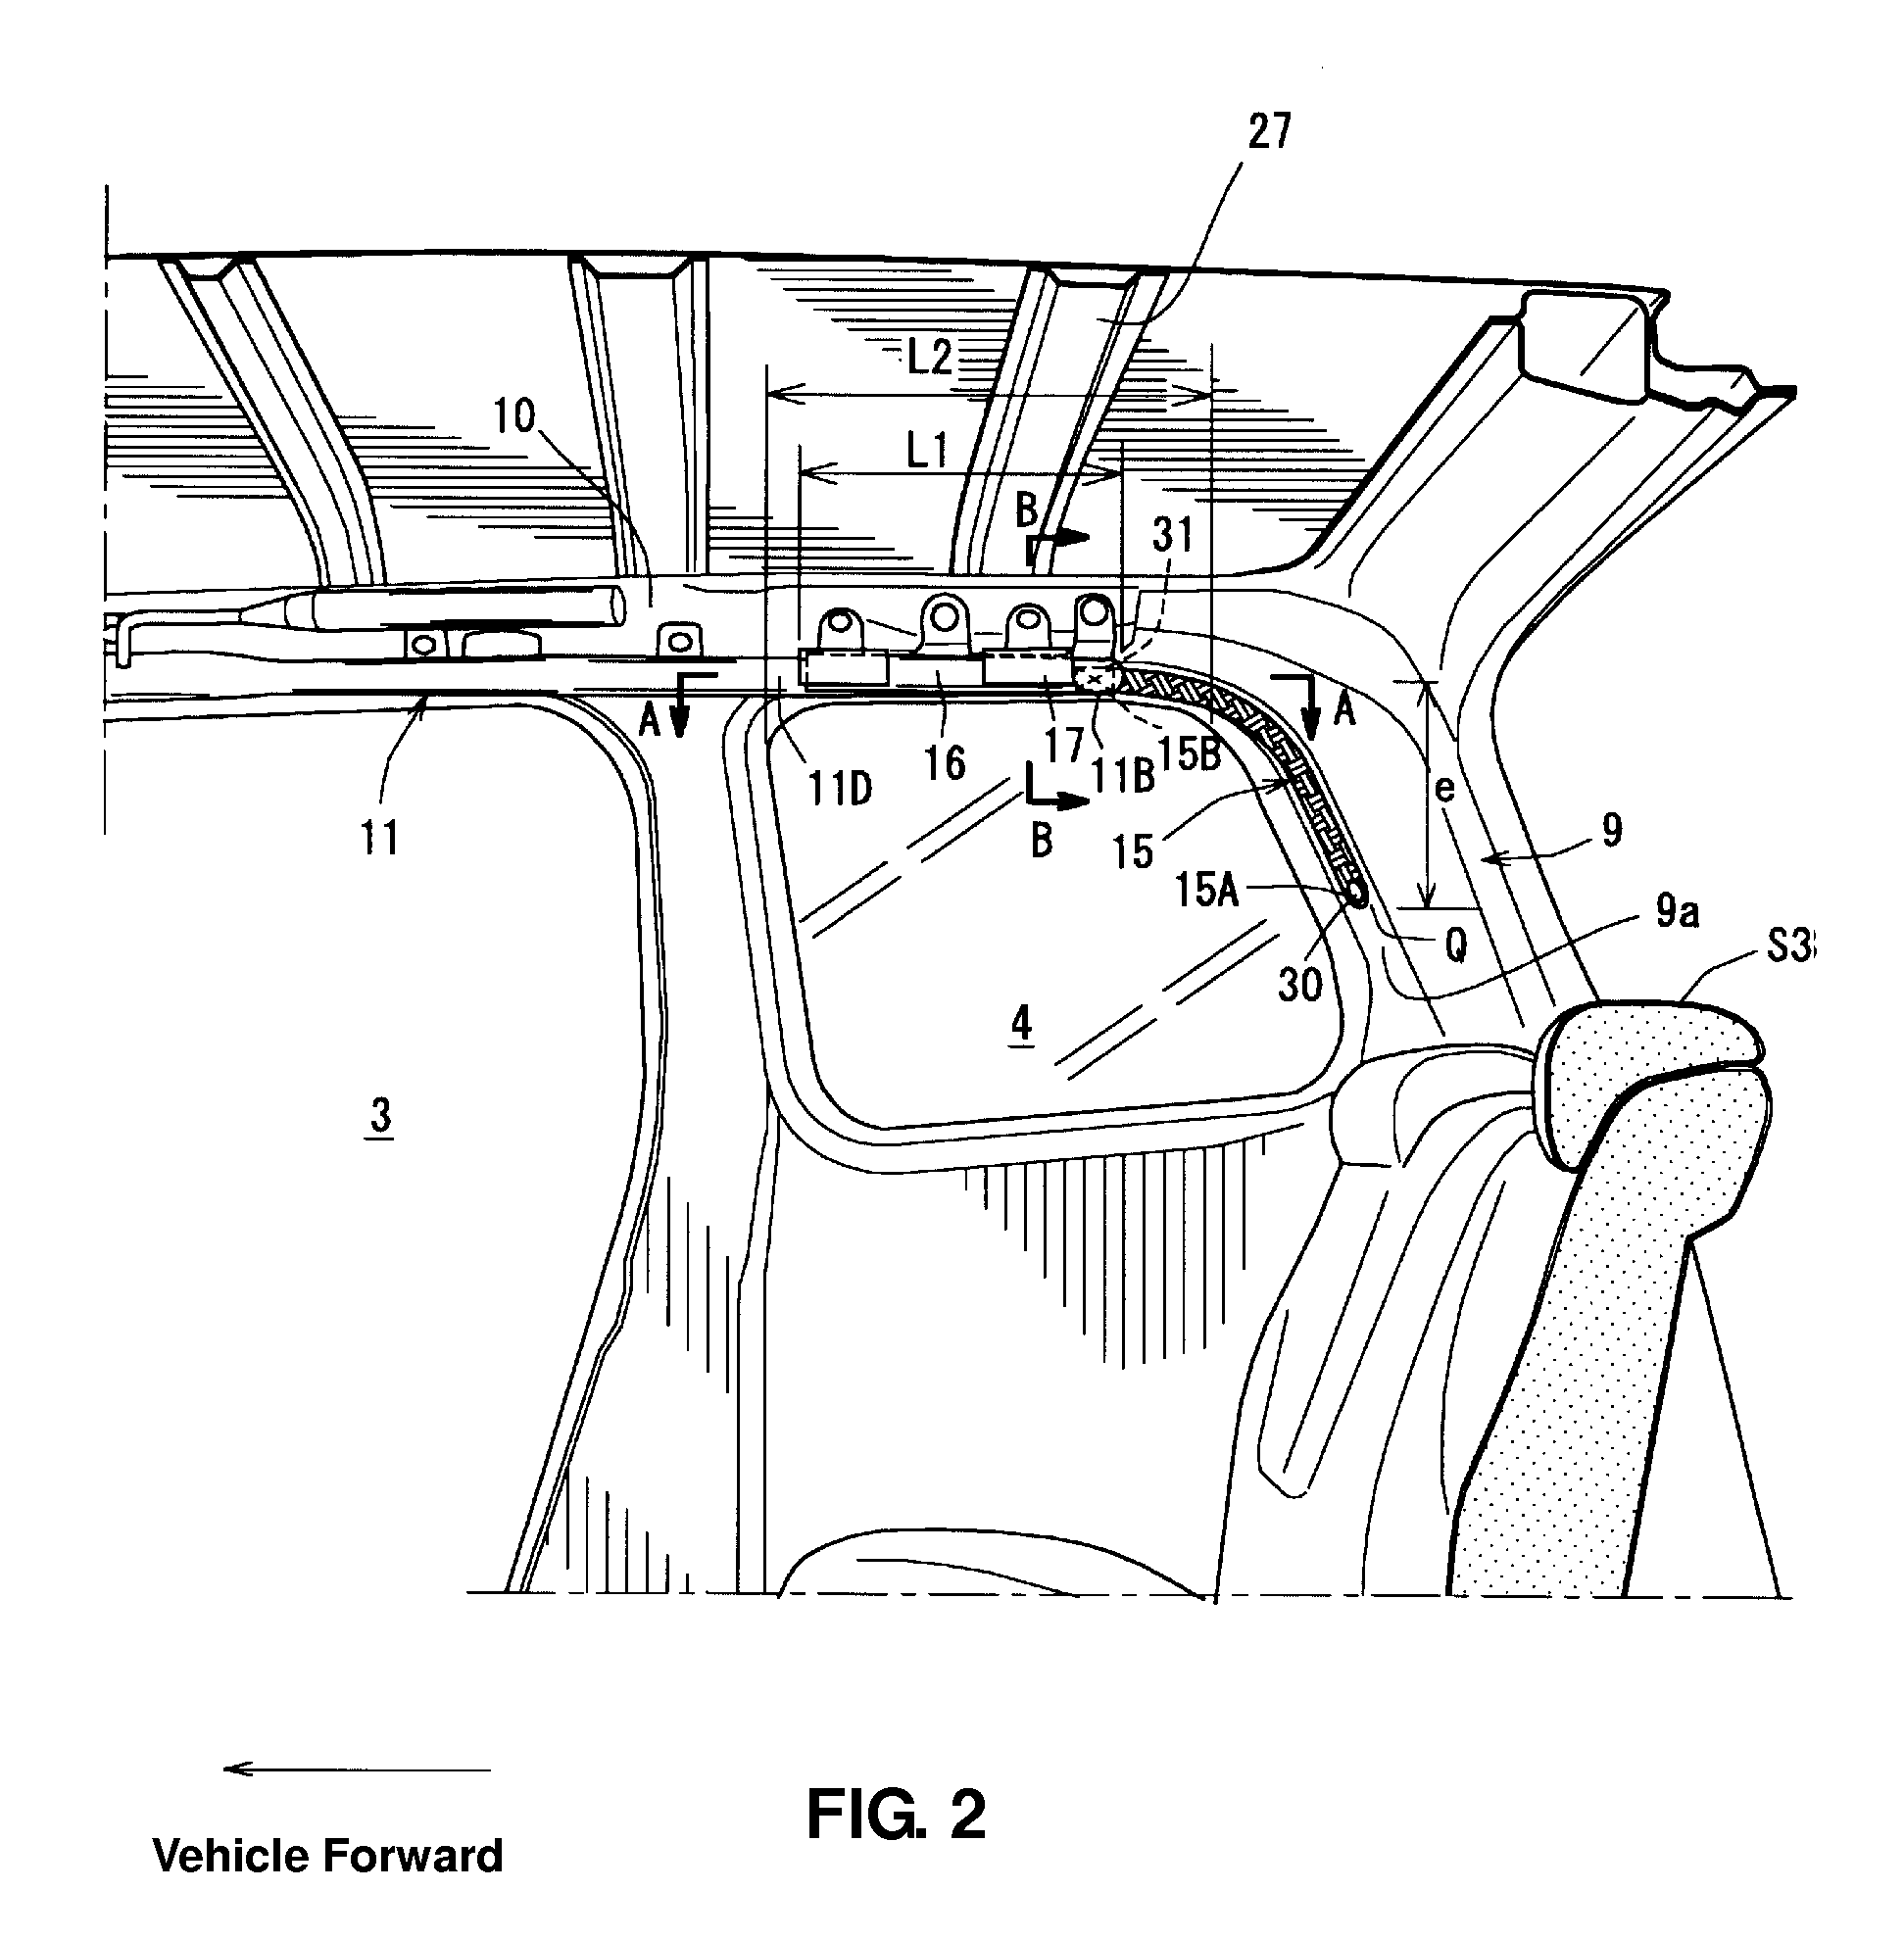 Interior structure of vehicle equipped with curtain airbag